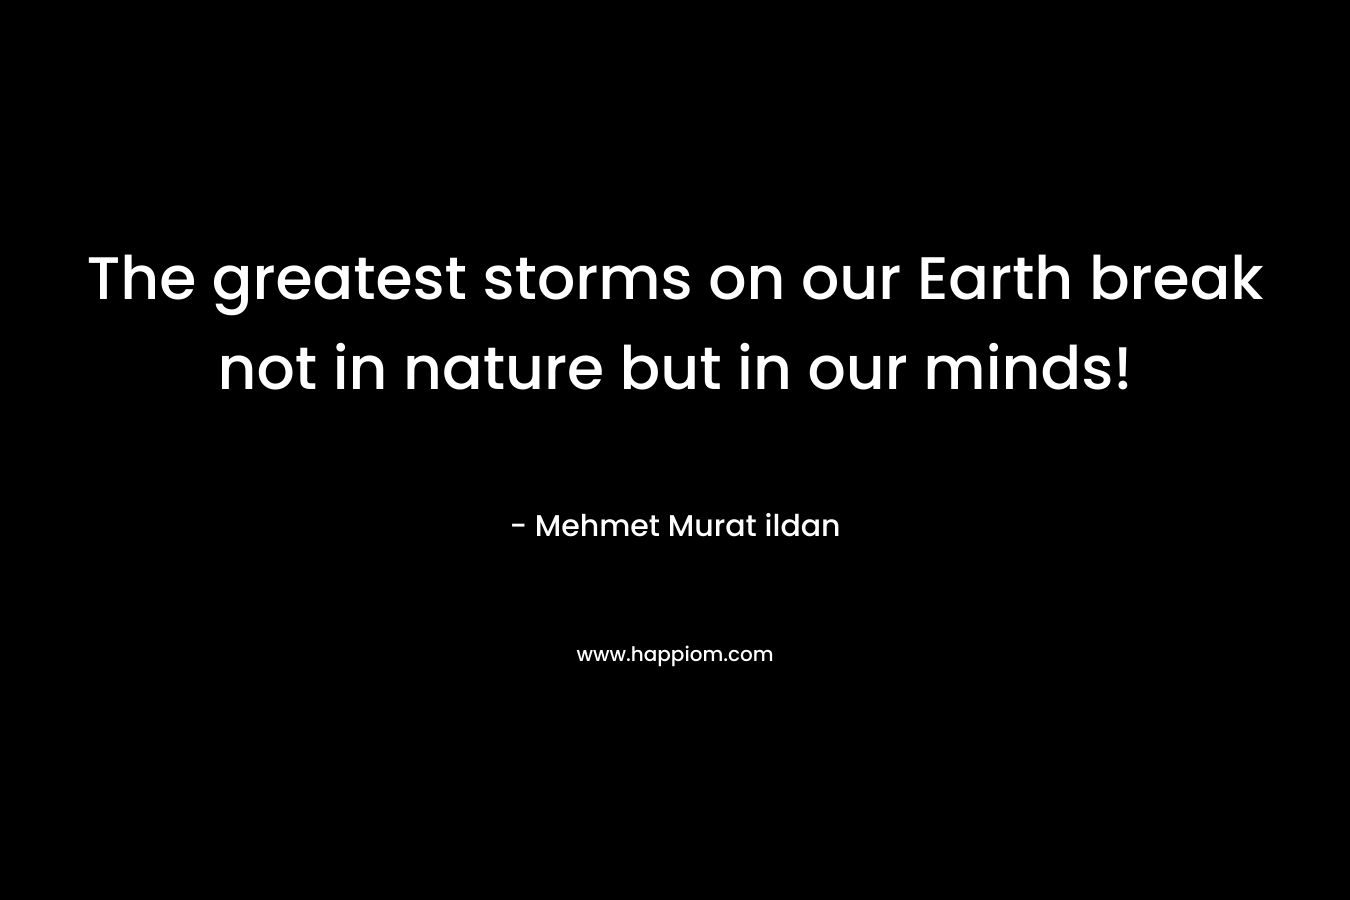 The greatest storms on our Earth break not in nature but in our minds!